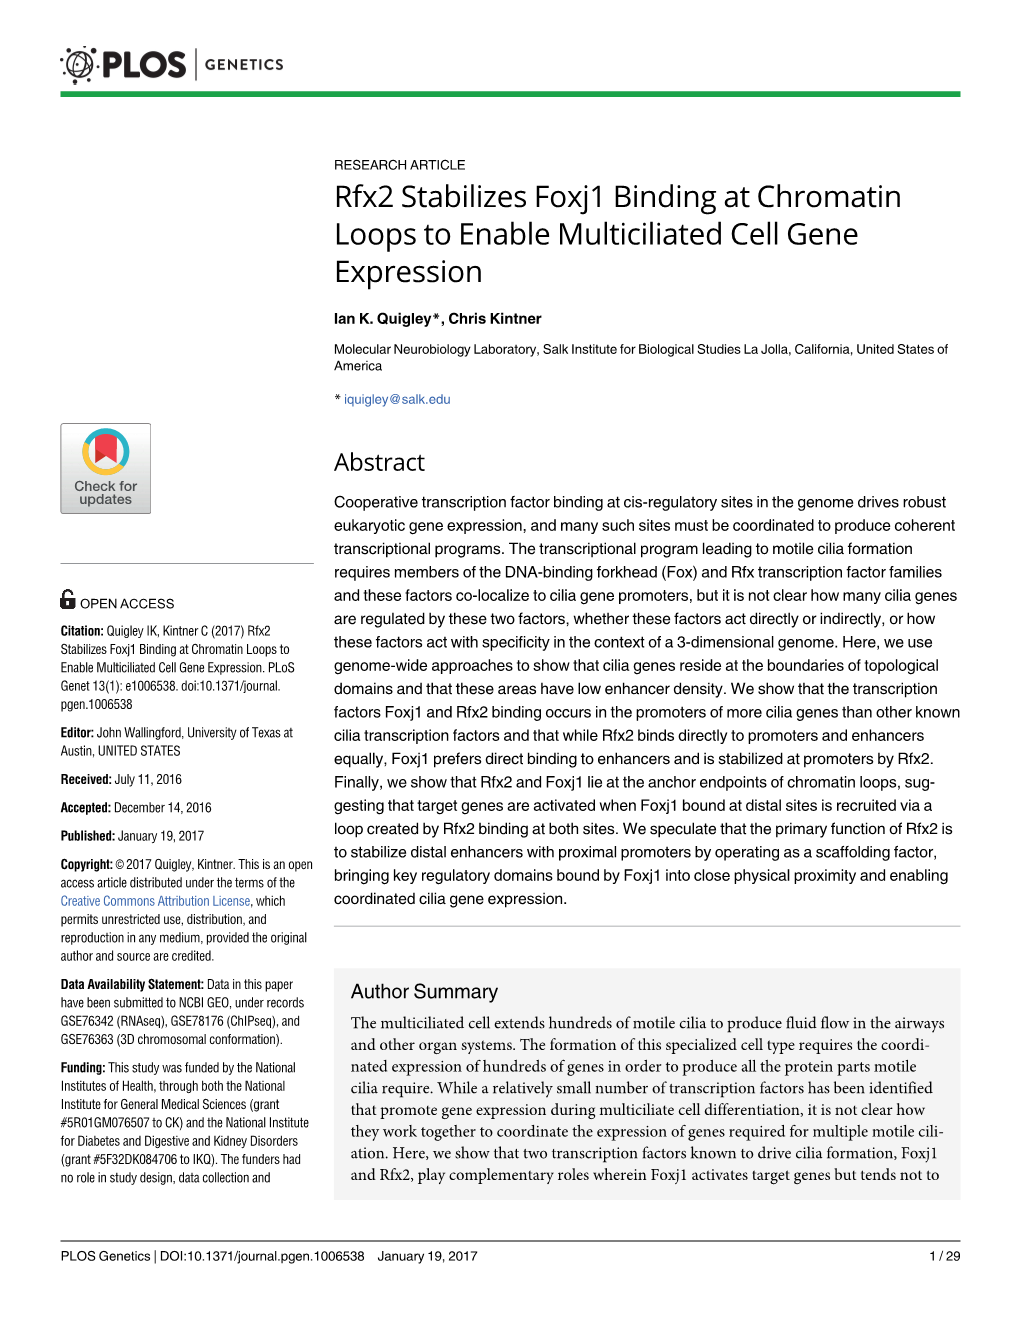 Rfx2 Stabilizes Foxj1 Binding at Chromatin Loops to Enable Multiciliated Cell Gene Expression